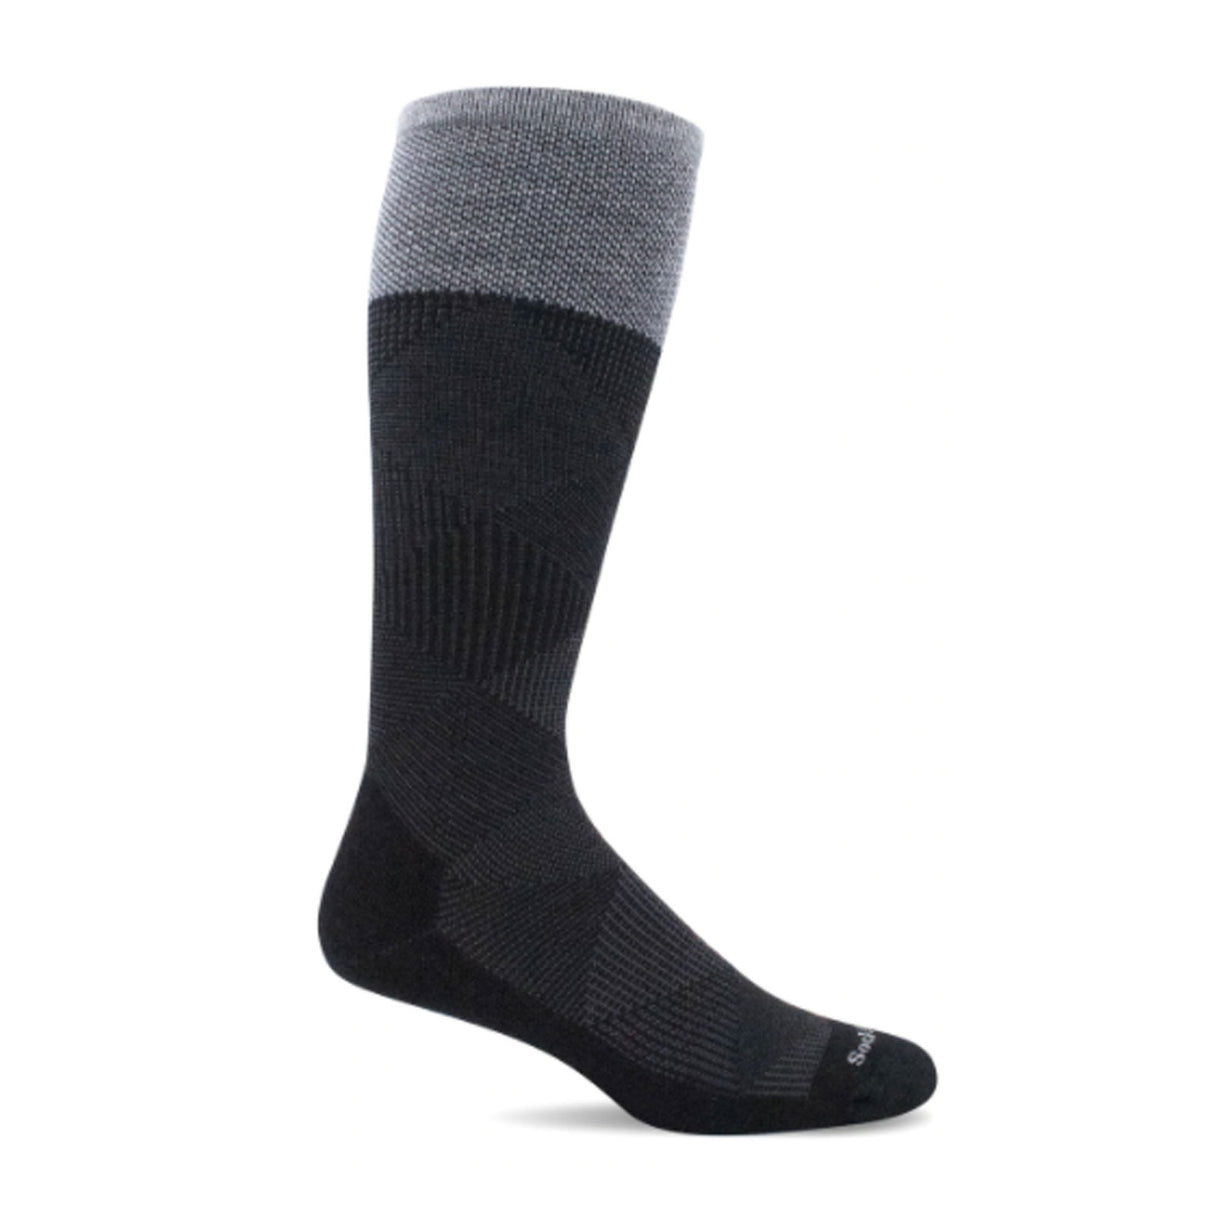 Sockwell Diamond Dandy Over the Calf Compression Sock (Men) - Black Accessories - Socks - Lifestyle - The Heel Shoe Fitters